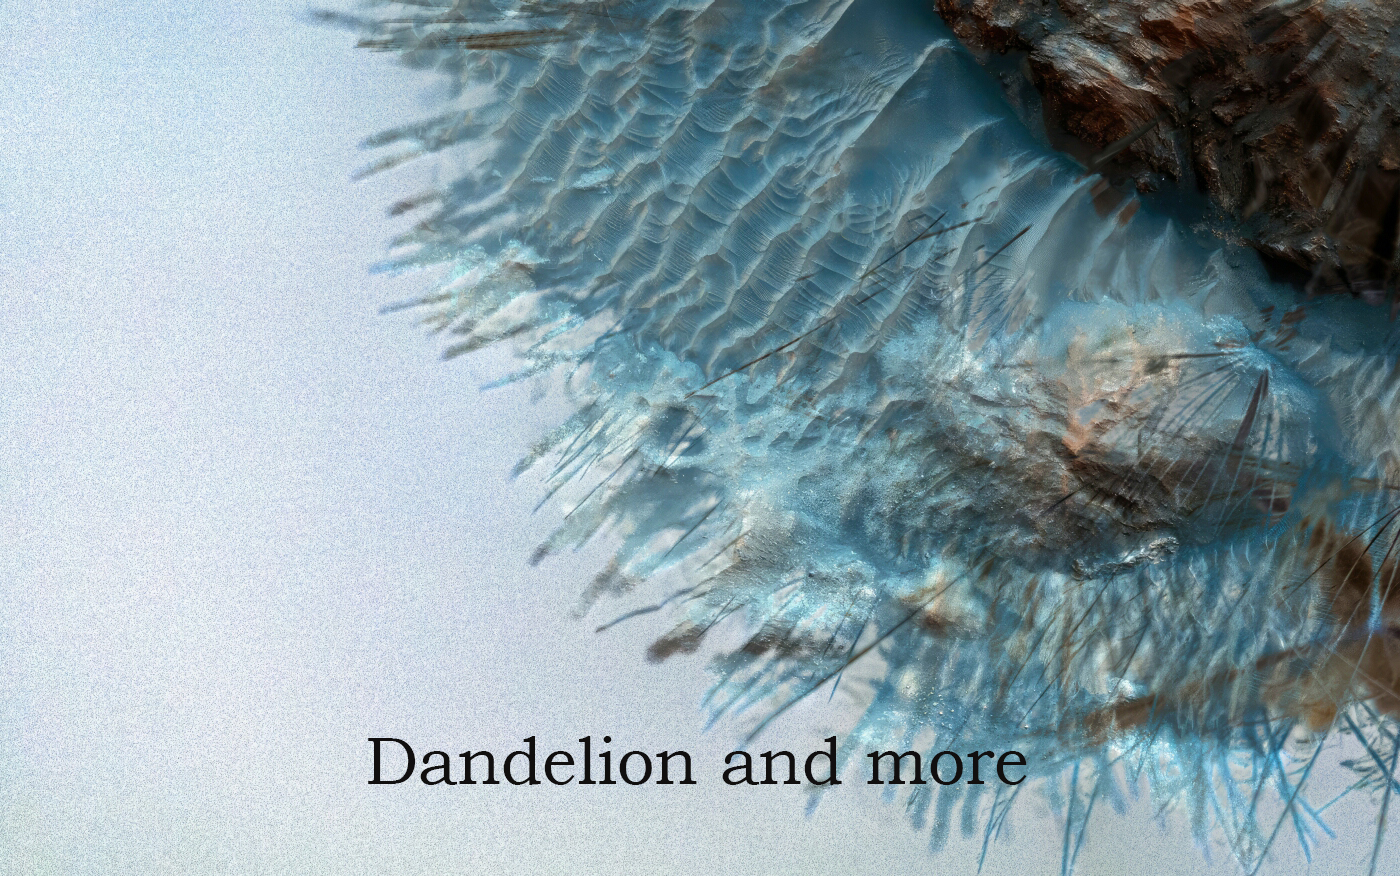 Dandelion and more